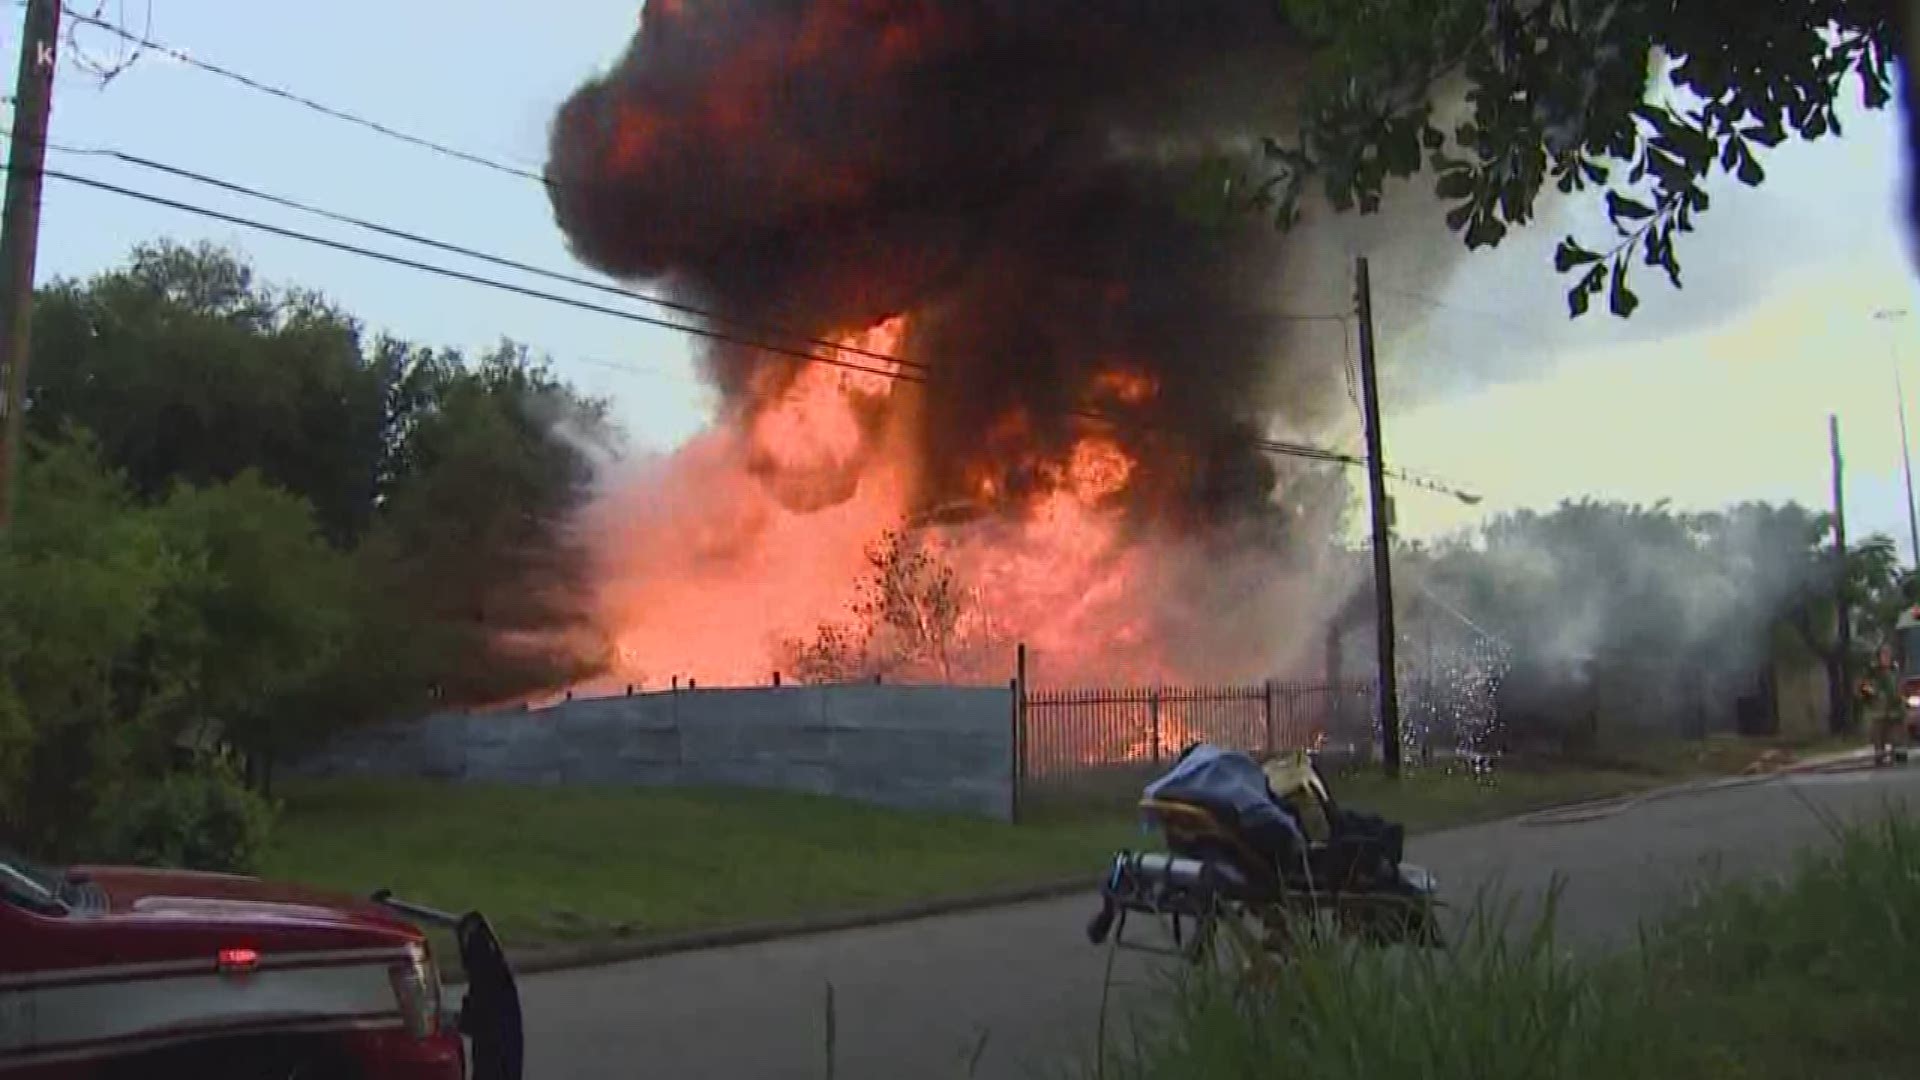 A house in Houston's east end is a total loss after a massive fire. Thankfully, no injuries were reported.